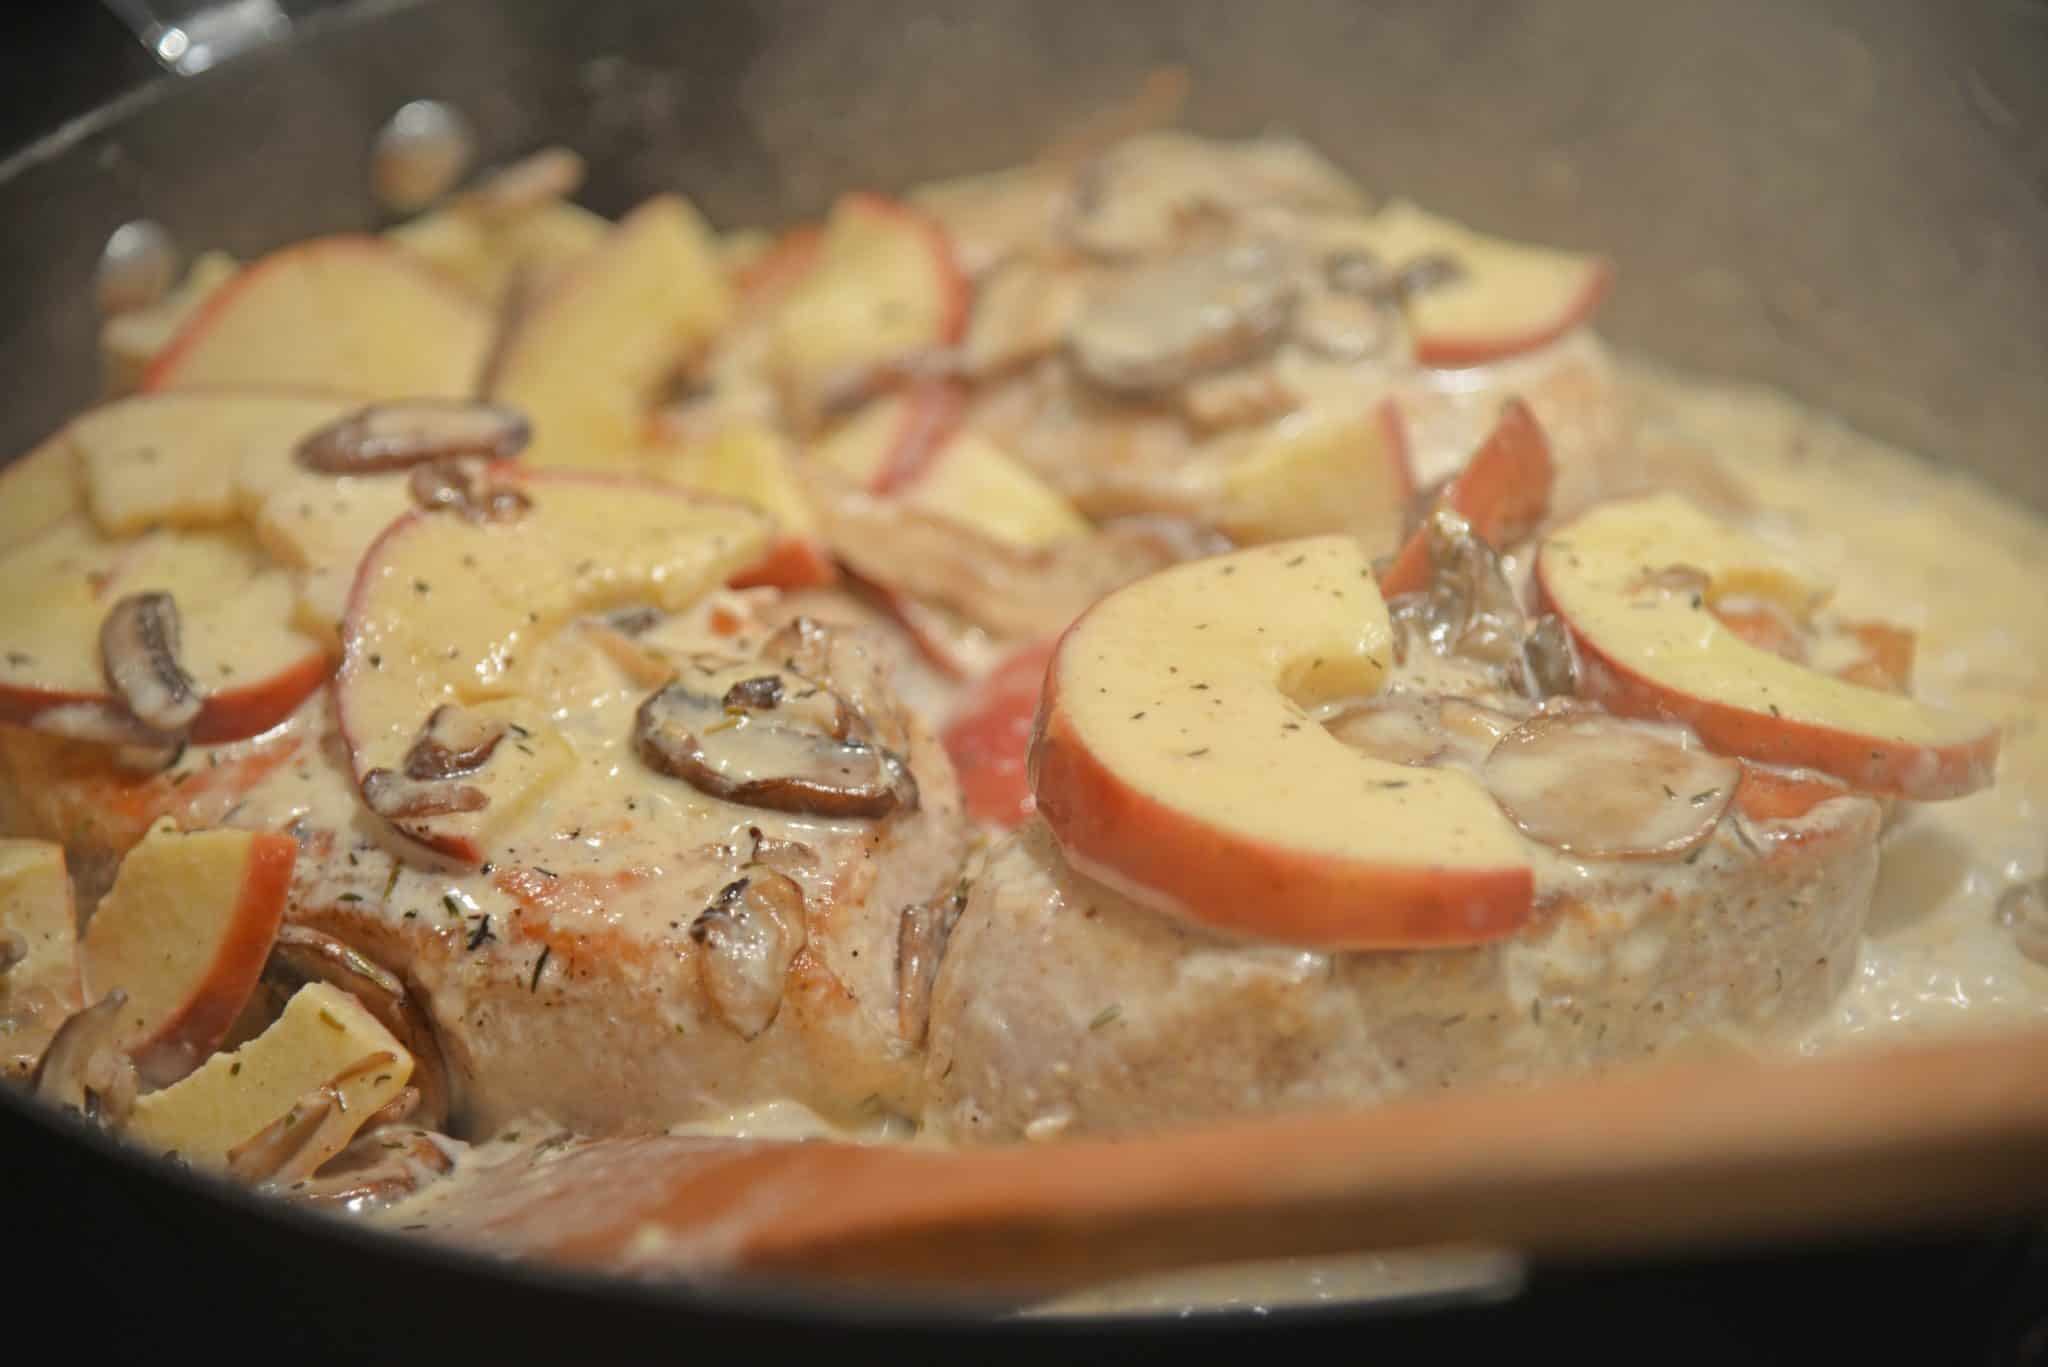 Creamy Apple Pork Chops are a wholesome meal your whole family will enjoy. Mushrooms, apples, juicy pork chops in a savory cream sauce all ready in just 15 minutes. Serve with rice, couscous or noodles. #easyporkchoprecipe www.saovryexperiments.com 